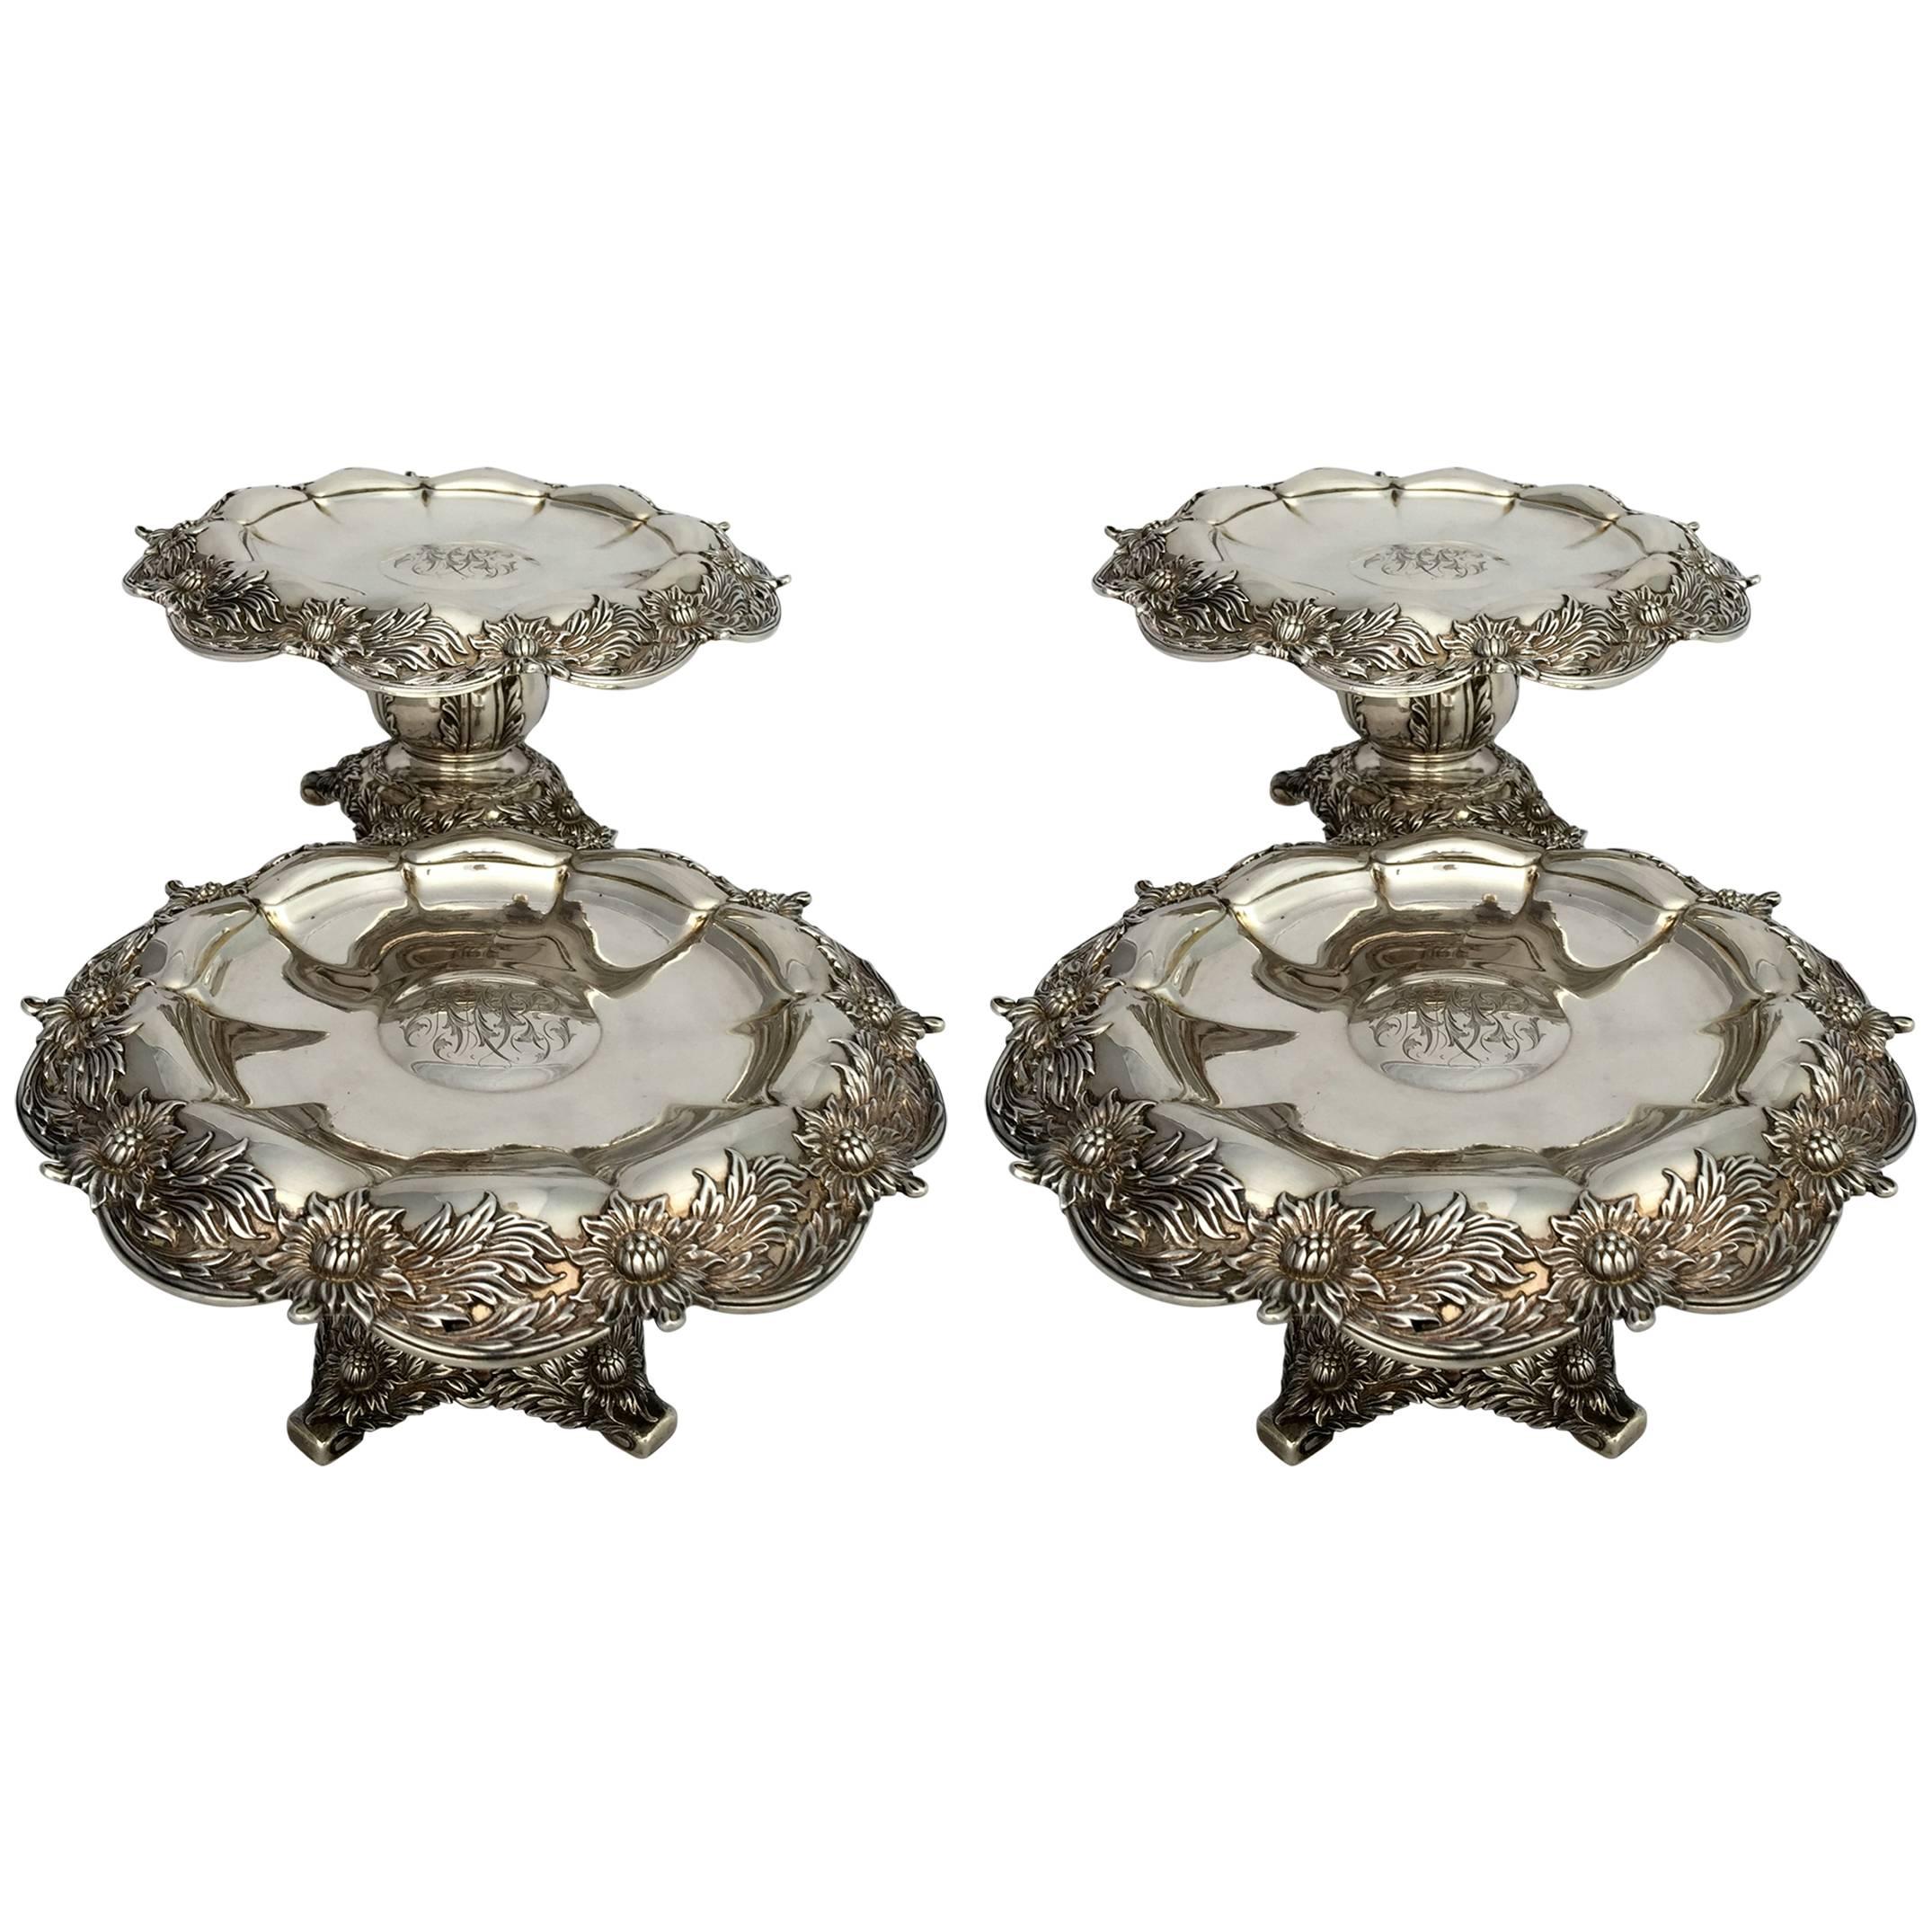 Pair of Fine Early 20th Century Tiffany Tazzas in the Chrysanthemum Pattern